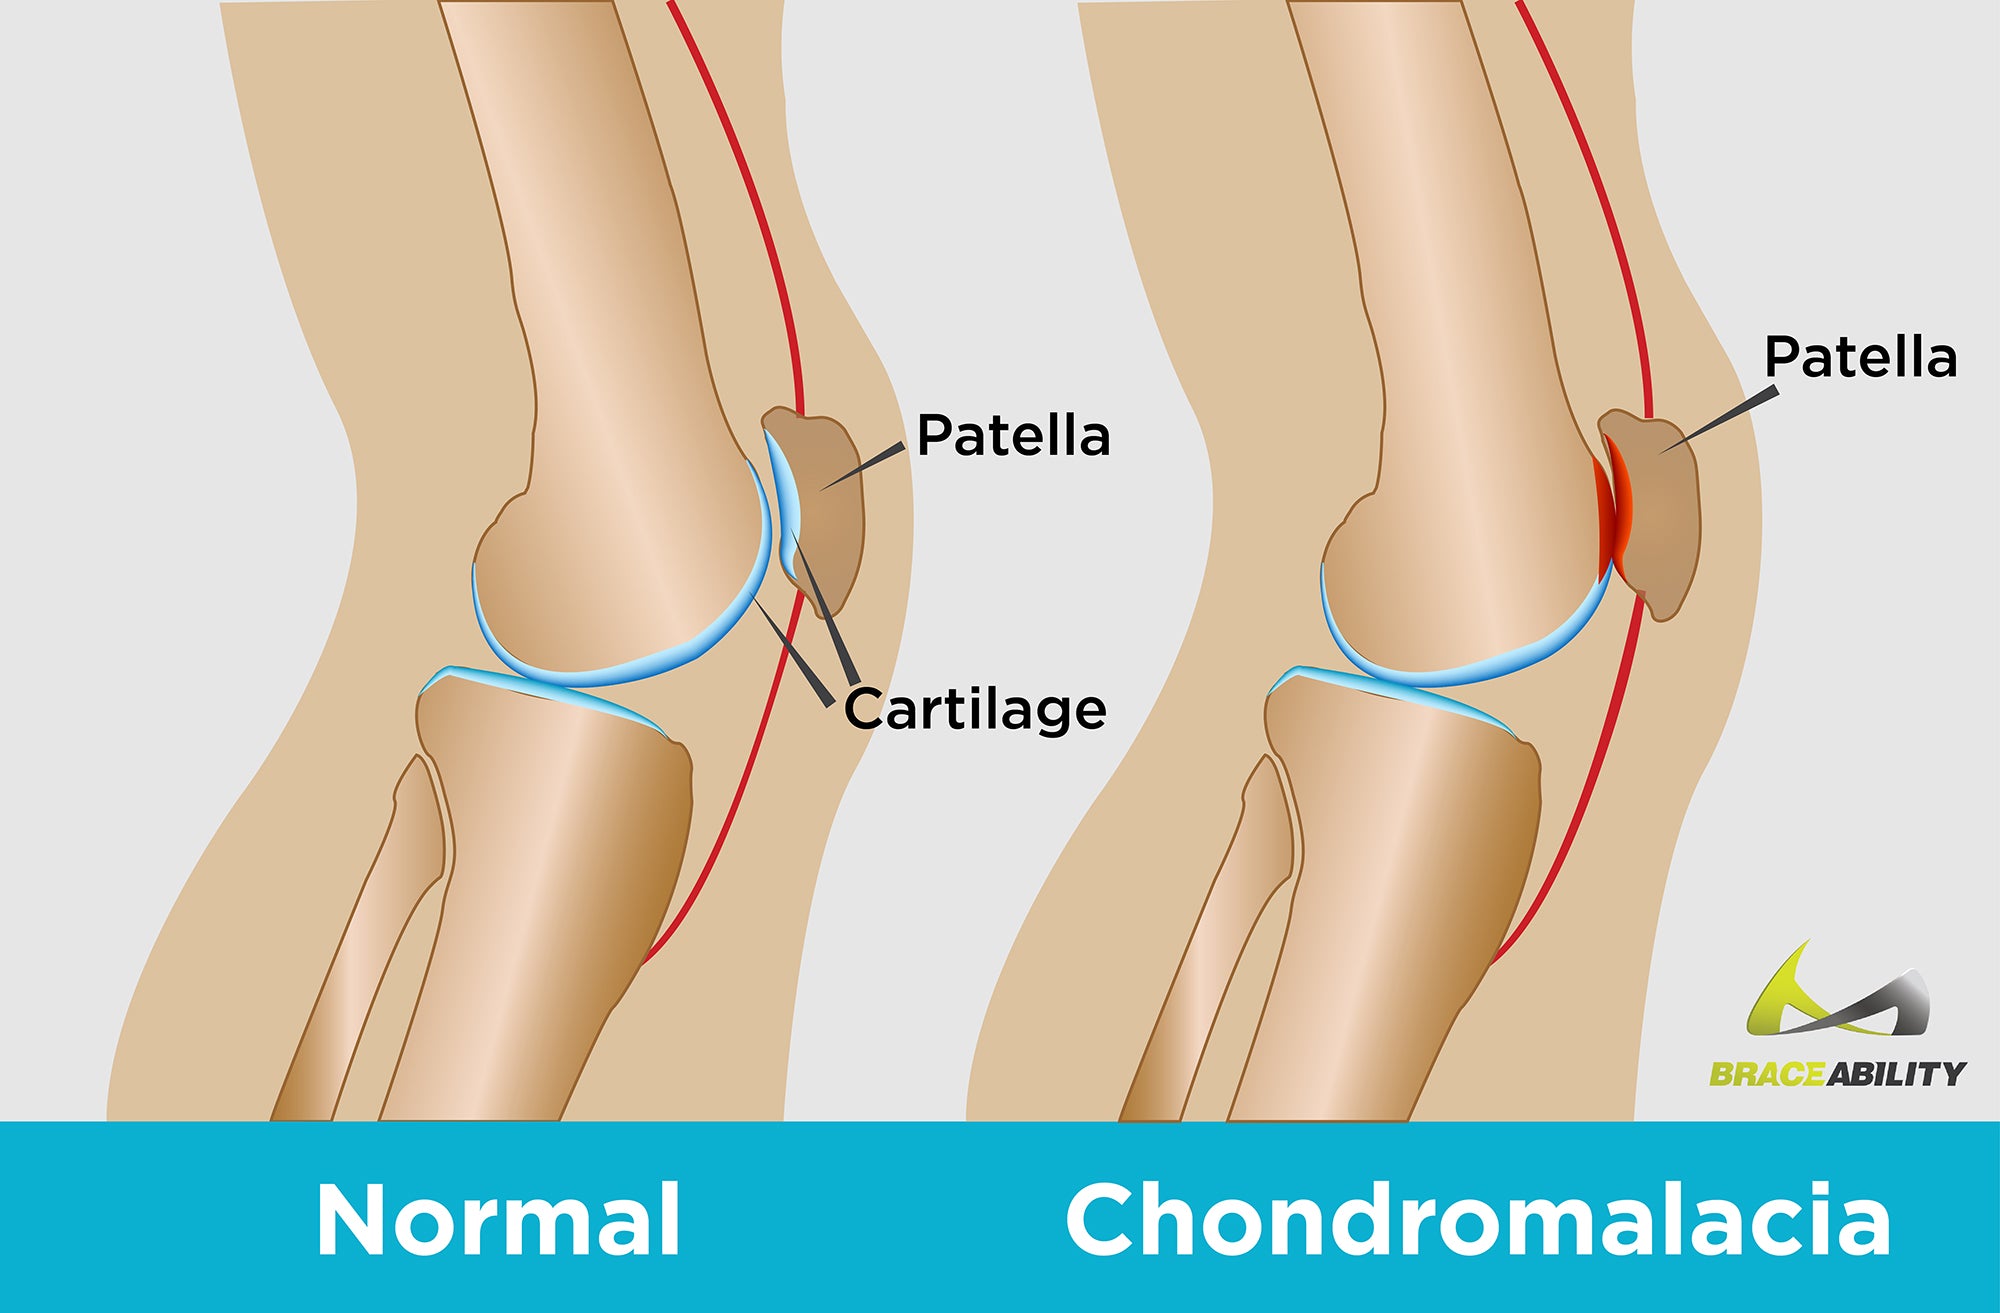 graphic shows how cartilage breaks down with use and causes kneecap to grind when chondromalacia is present